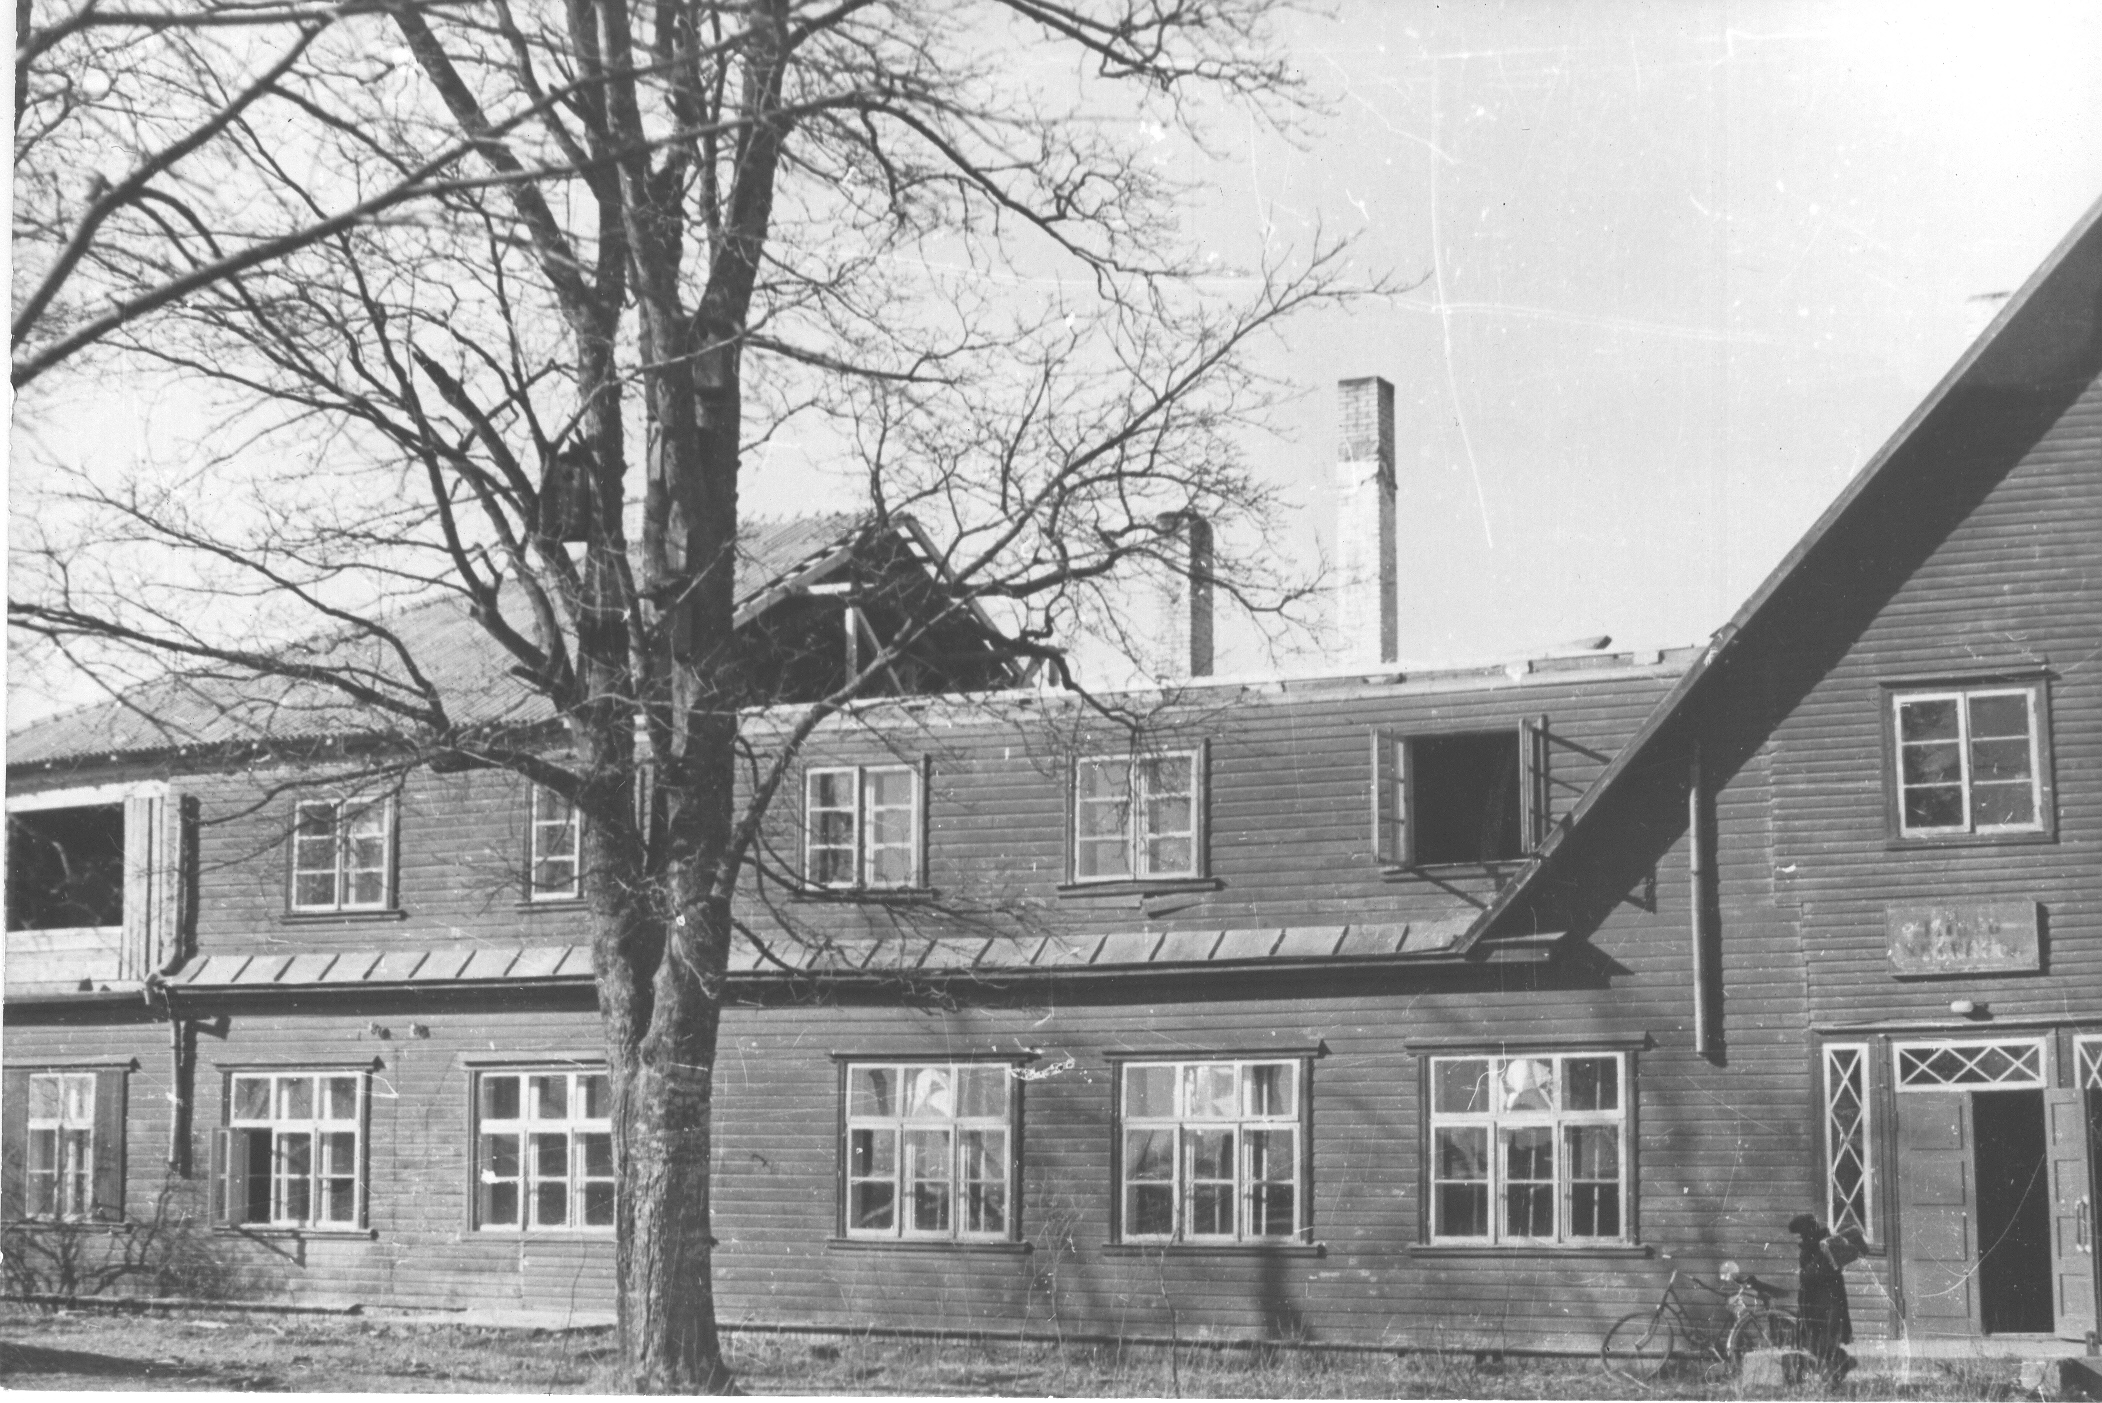 Photo and negative.Repair works of the schoolhouse in 1961.